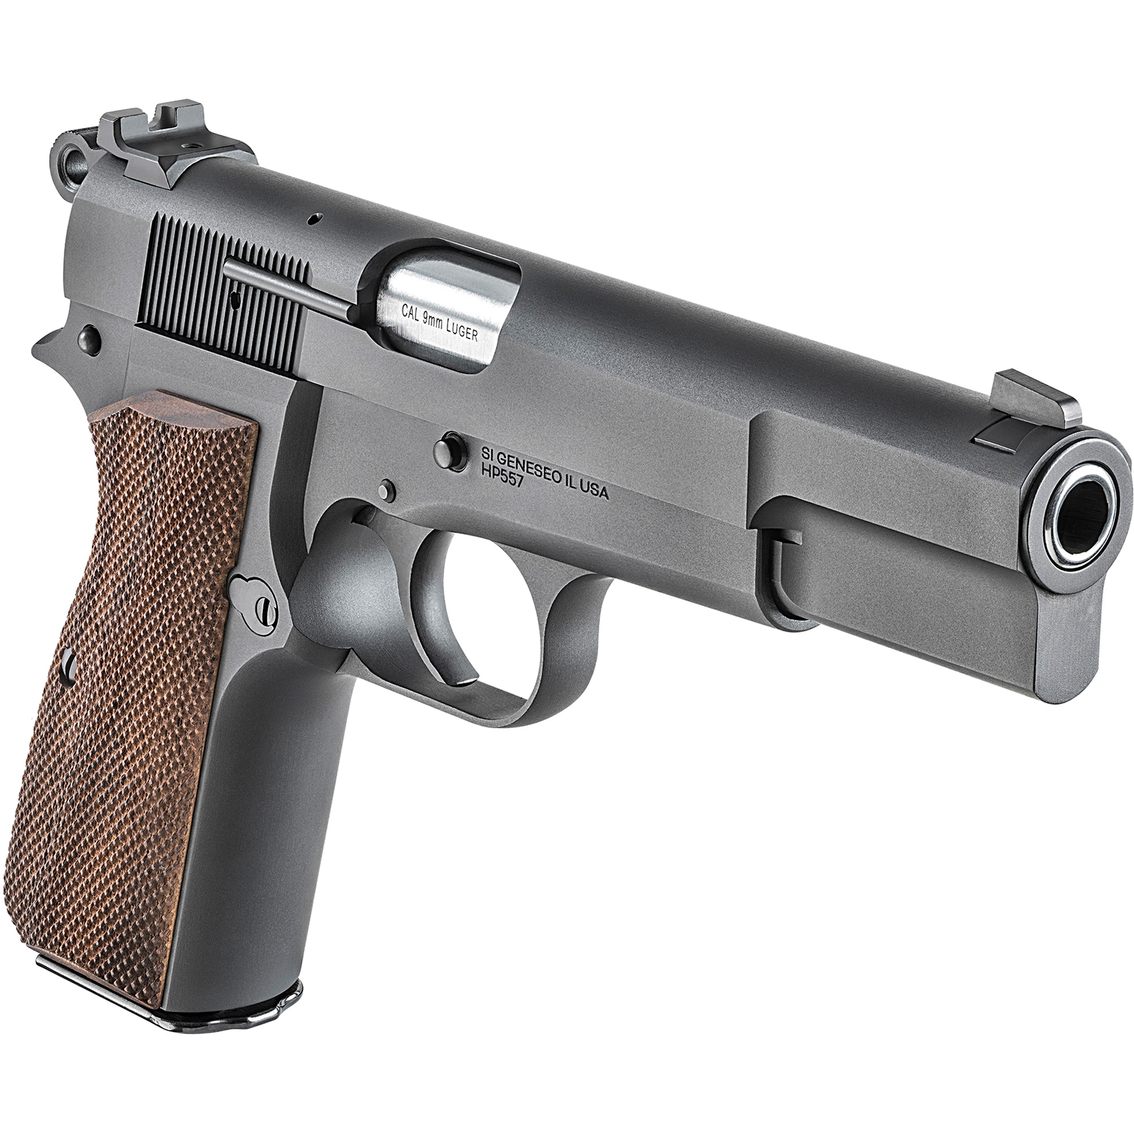 Springfield Armory SA 35 9mm 4.7 in. Barrel 15 Round Pistol, Black - Image 3 of 3